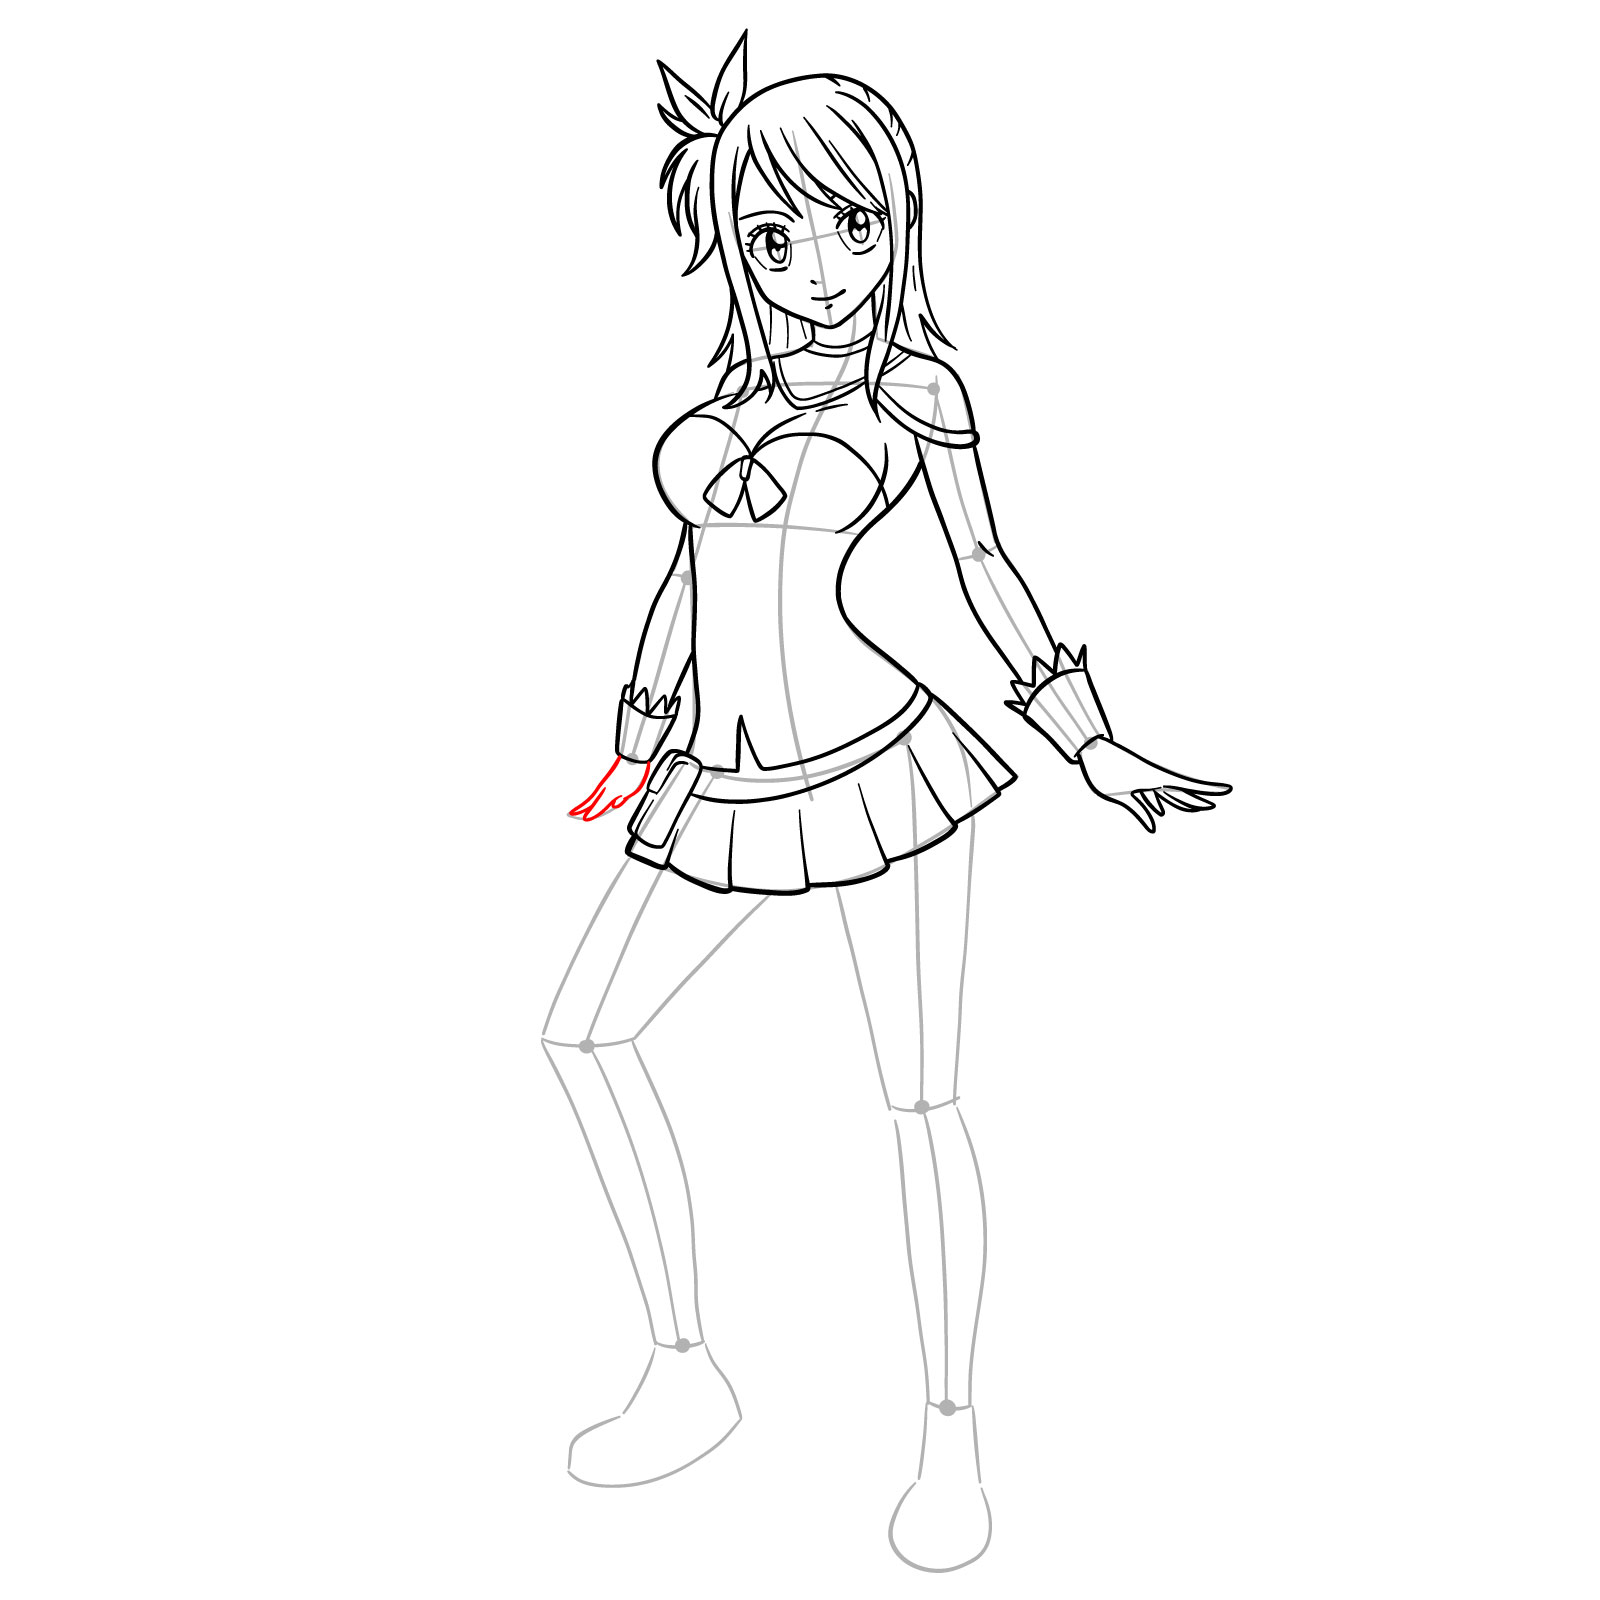 How to draw Lucy Heartfilia in a new outfit - step 25